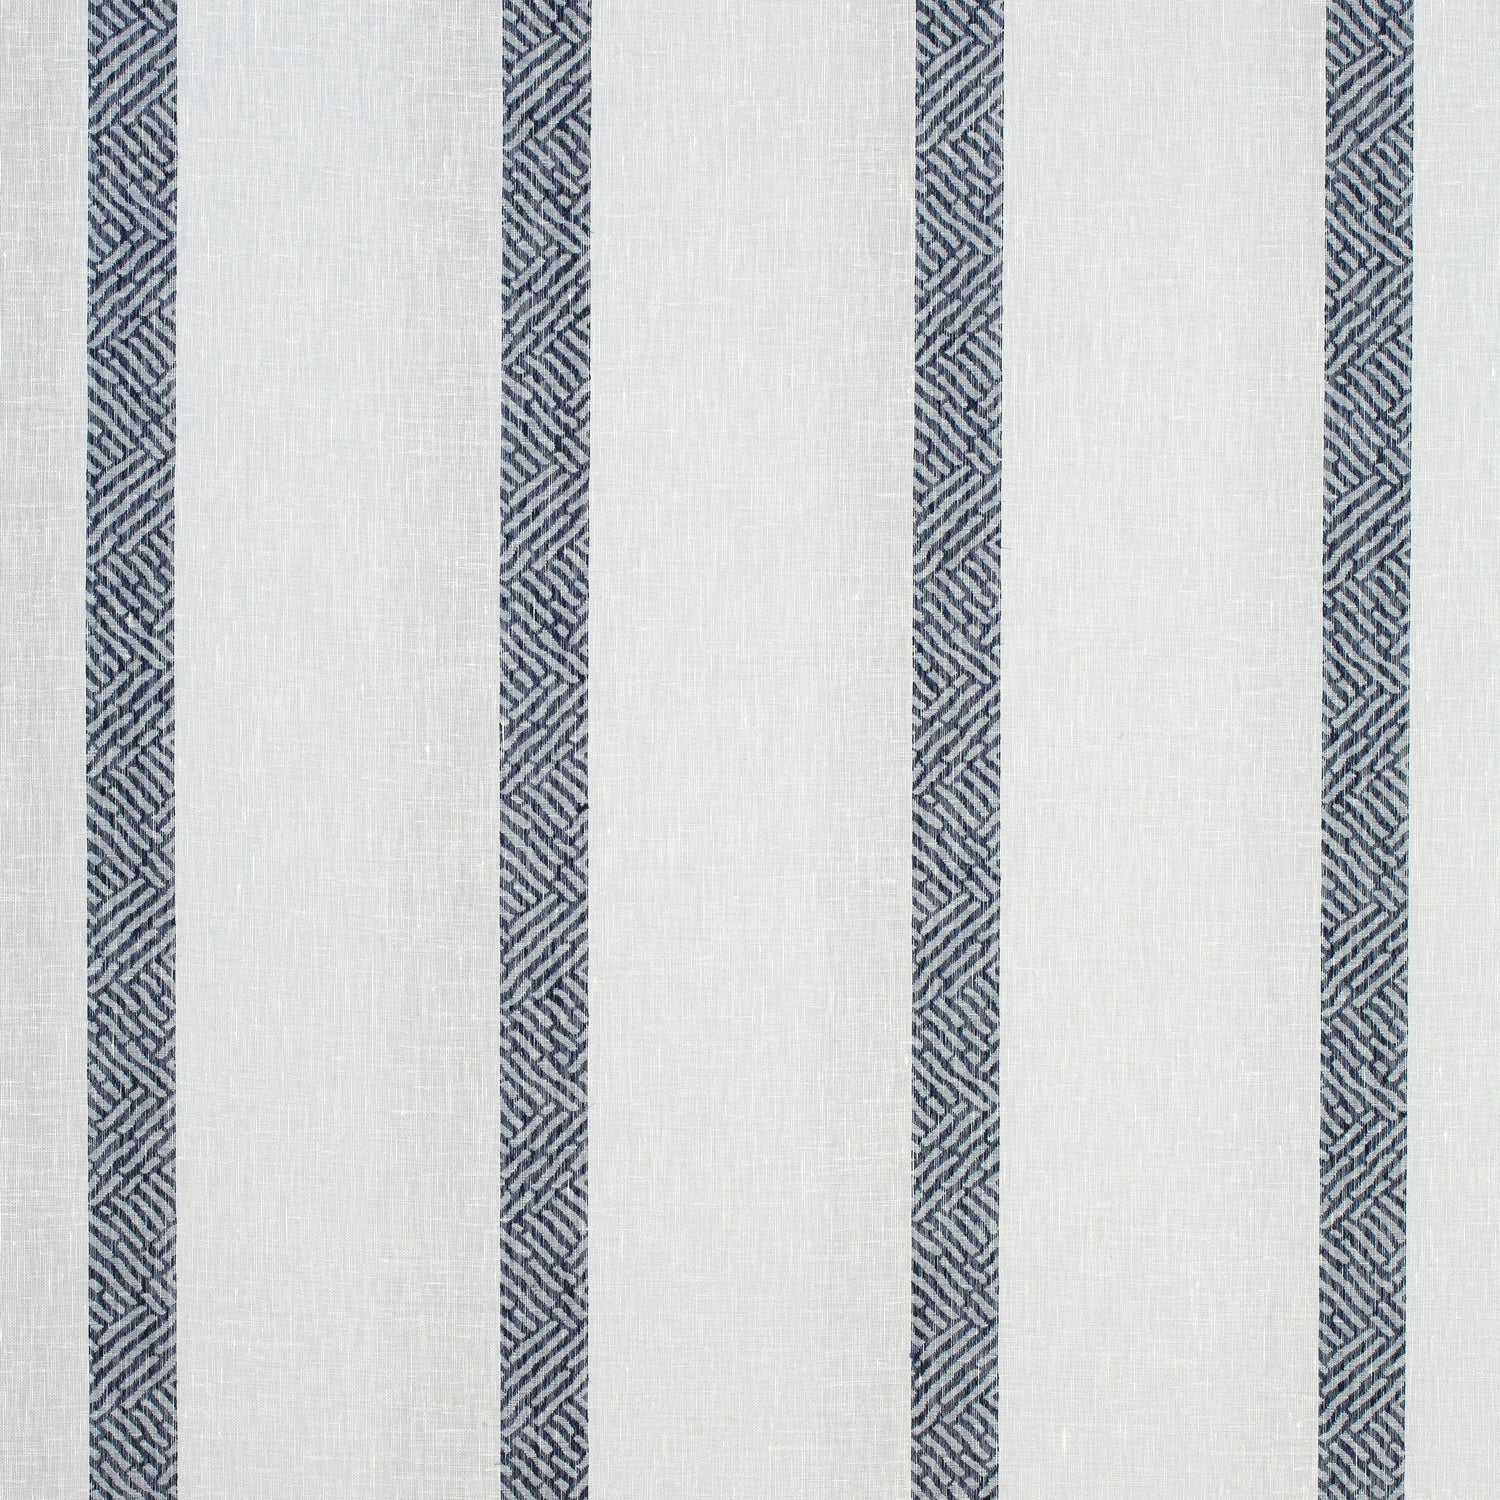 Cobble Hill Stripe fabric in navy color - pattern number FWW7127 - by Thibaut in the Atmosphere collection